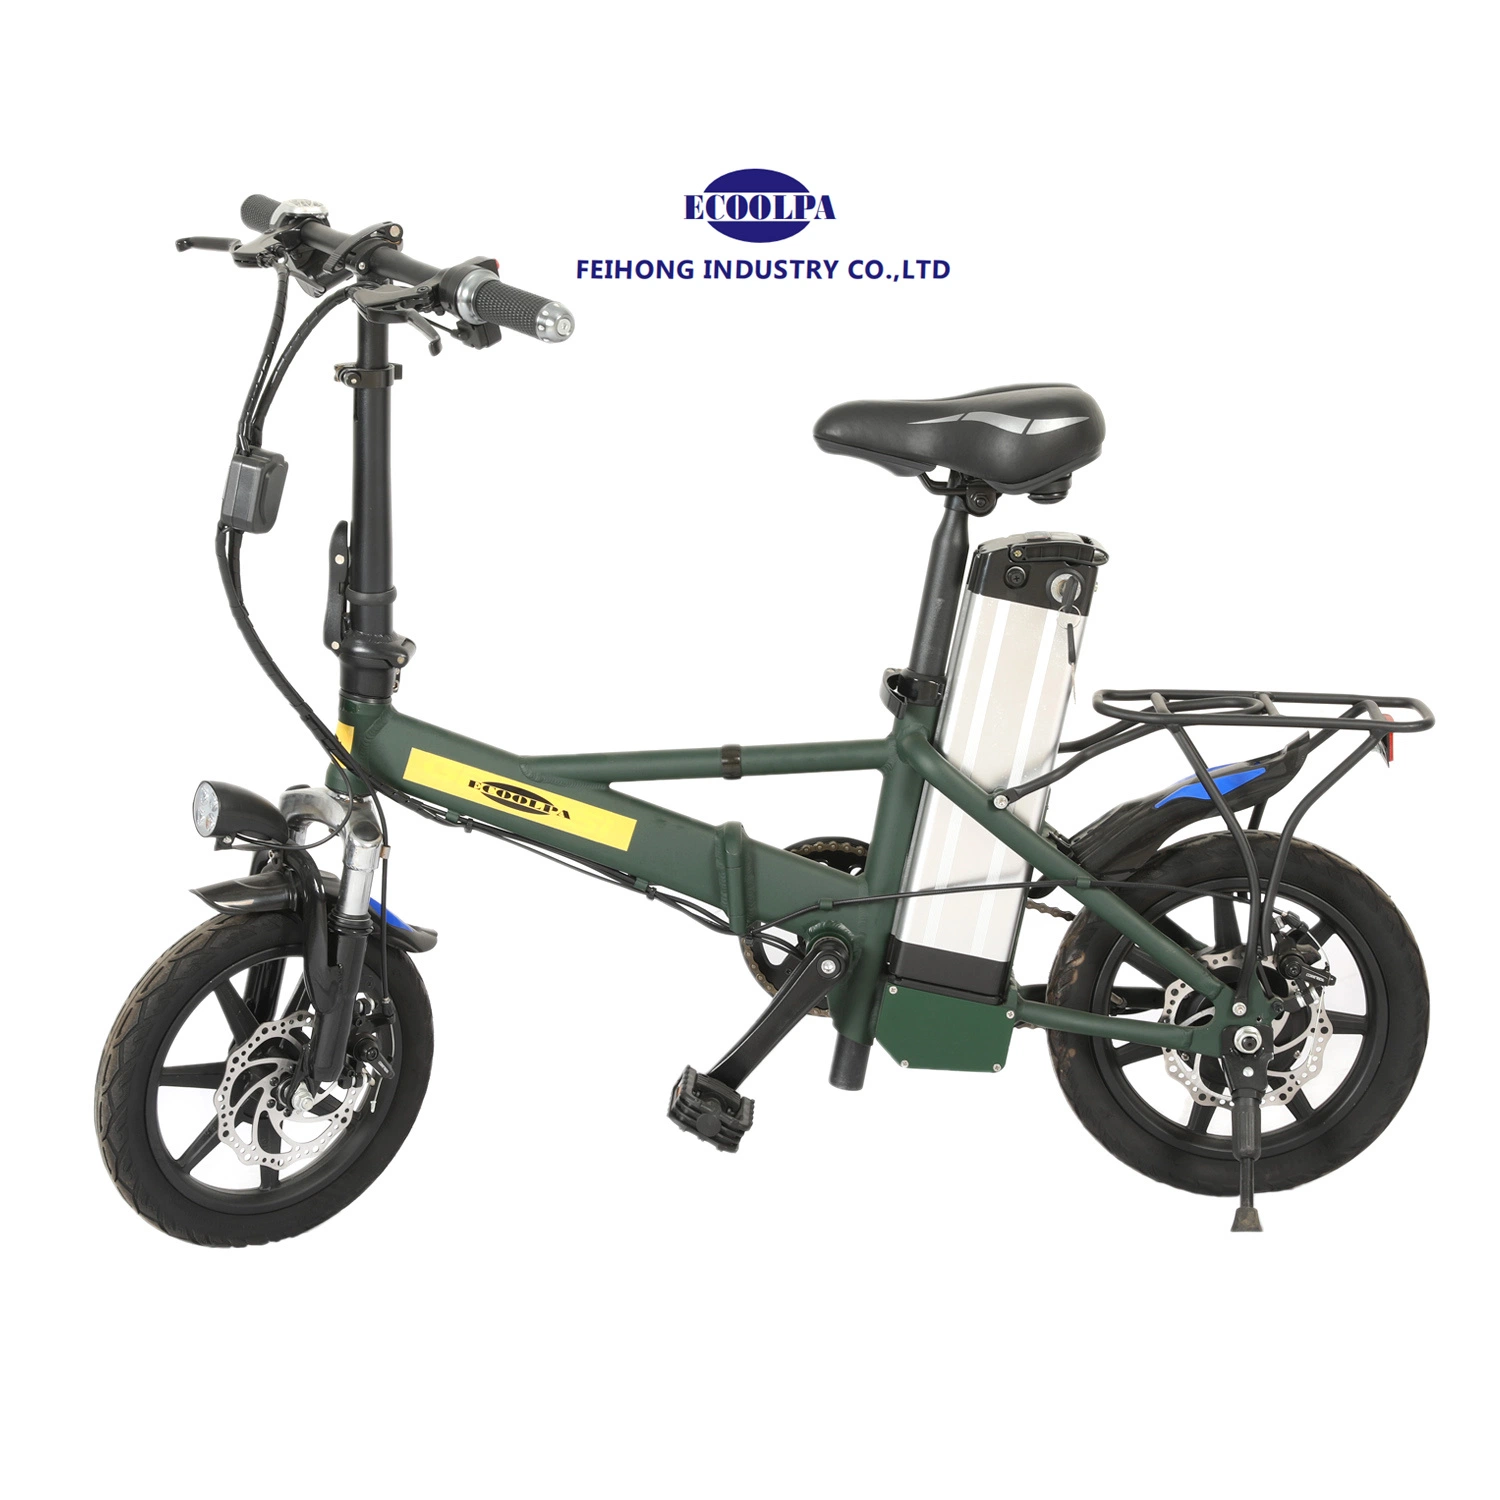 Motorcycle Electric Scooter Bicycle Electric Bike Electric Motorcycle Scooter Motor Scooter Road Bike Hybrid Bicycle Bike 48V 12ah Battery Electric Road Bike